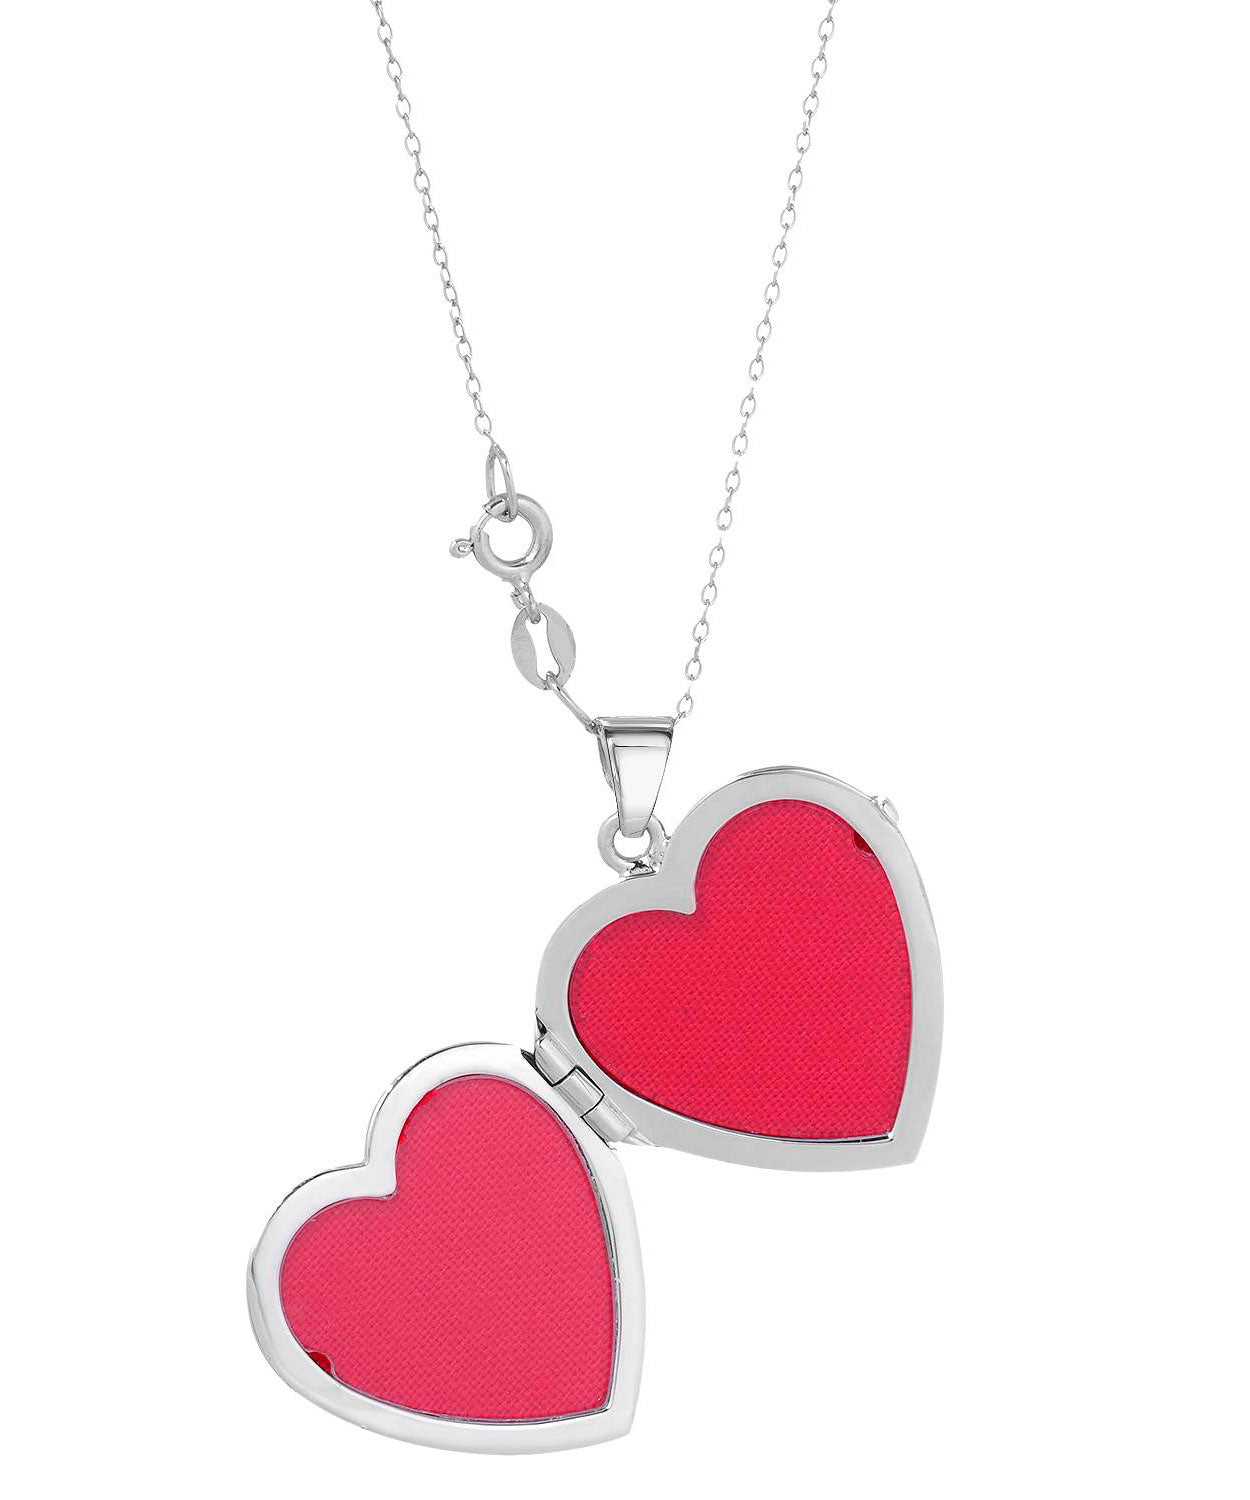 Patterns of Love Collection Rhodium Plated 925 Sterling Silver Heart Locket Pendant With Chain - Made in Italy View 2